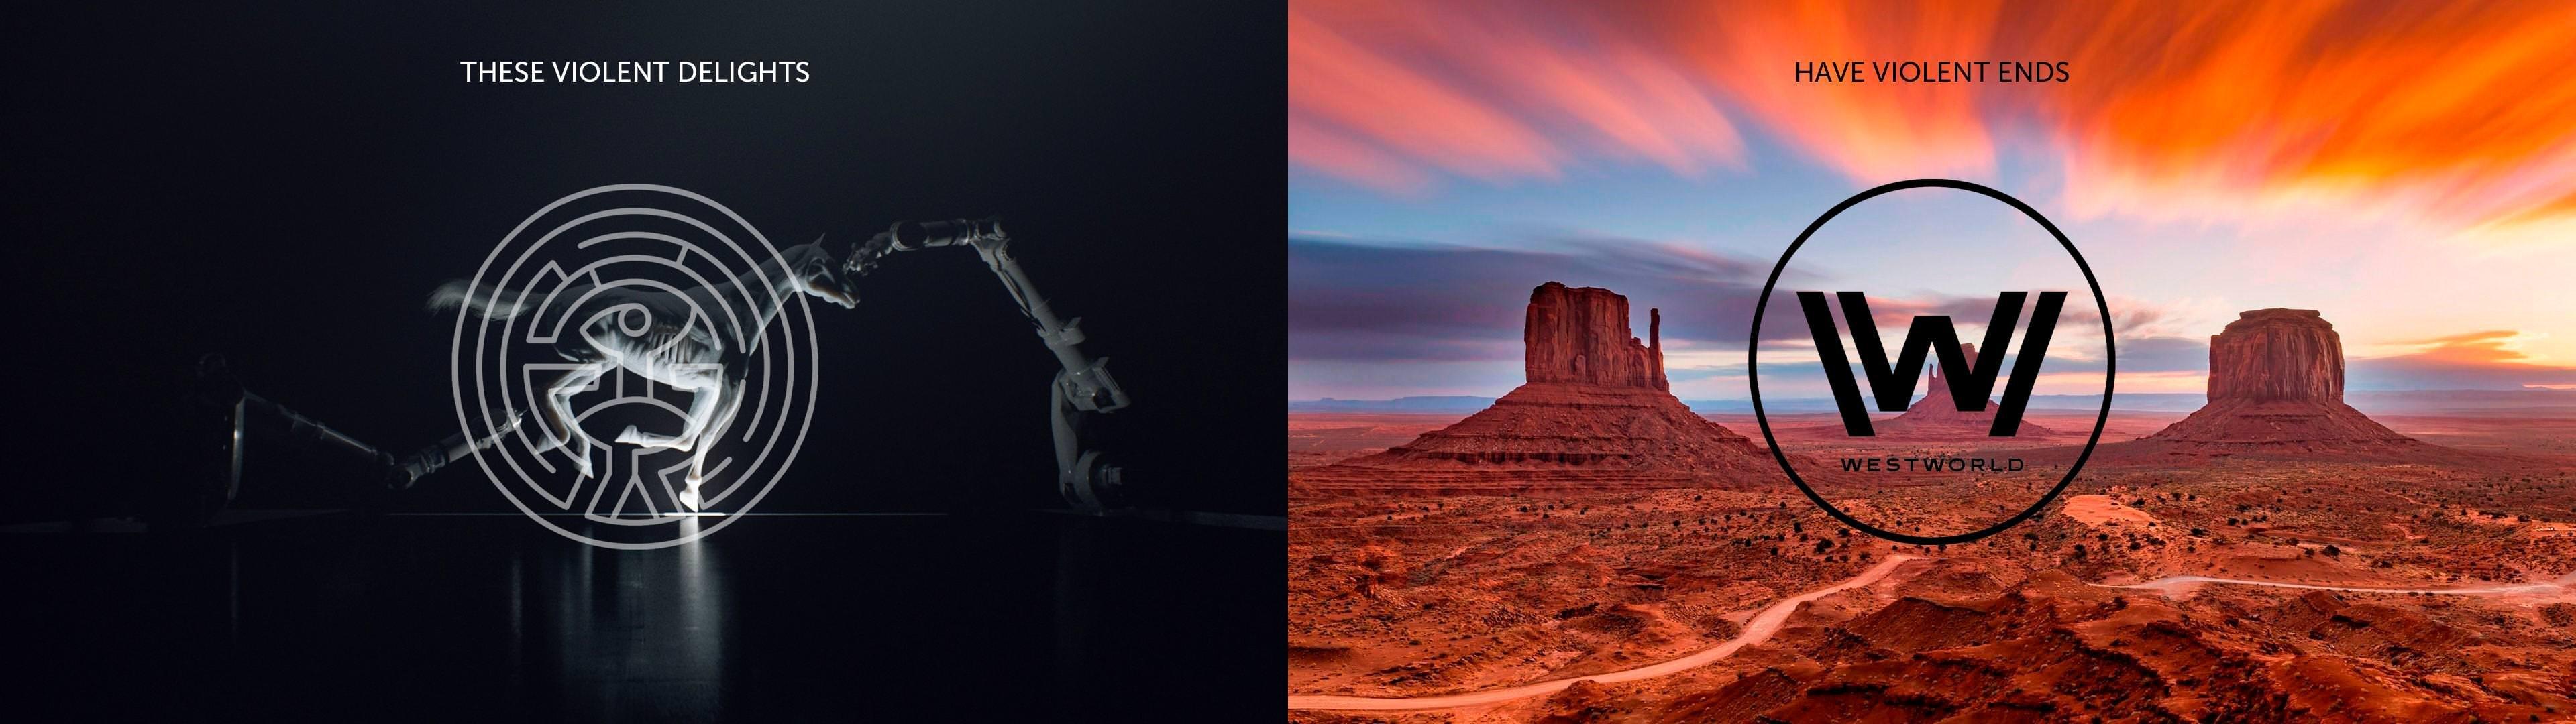 Westworld dual monitor wallpaper I just made in Photohop. What do